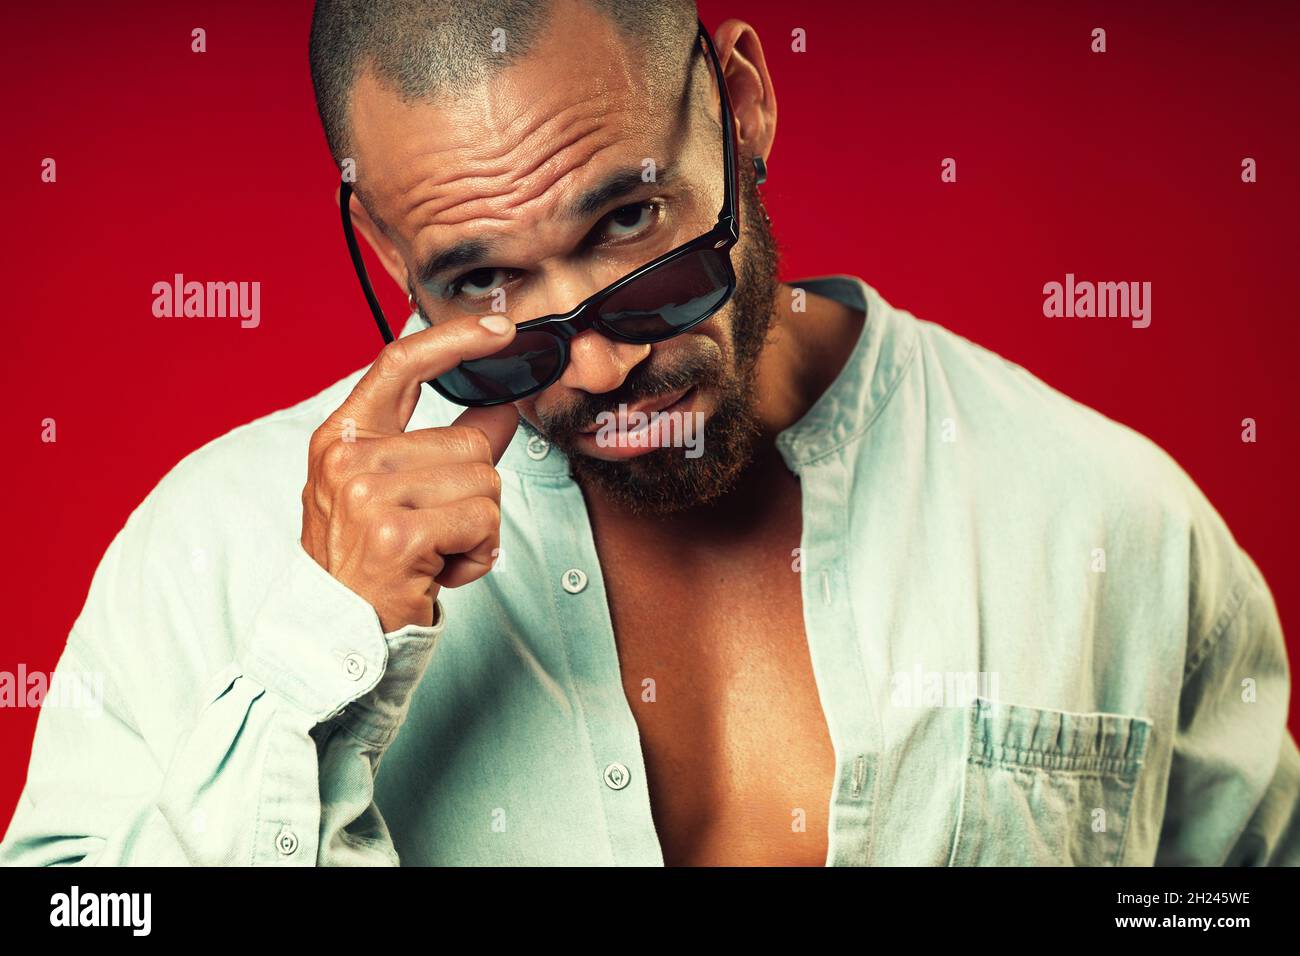 Portrait of a swarthy Latino questioning look from under sunglasses on a red background. Brutal bearded man with a short haircut. Stock Photo